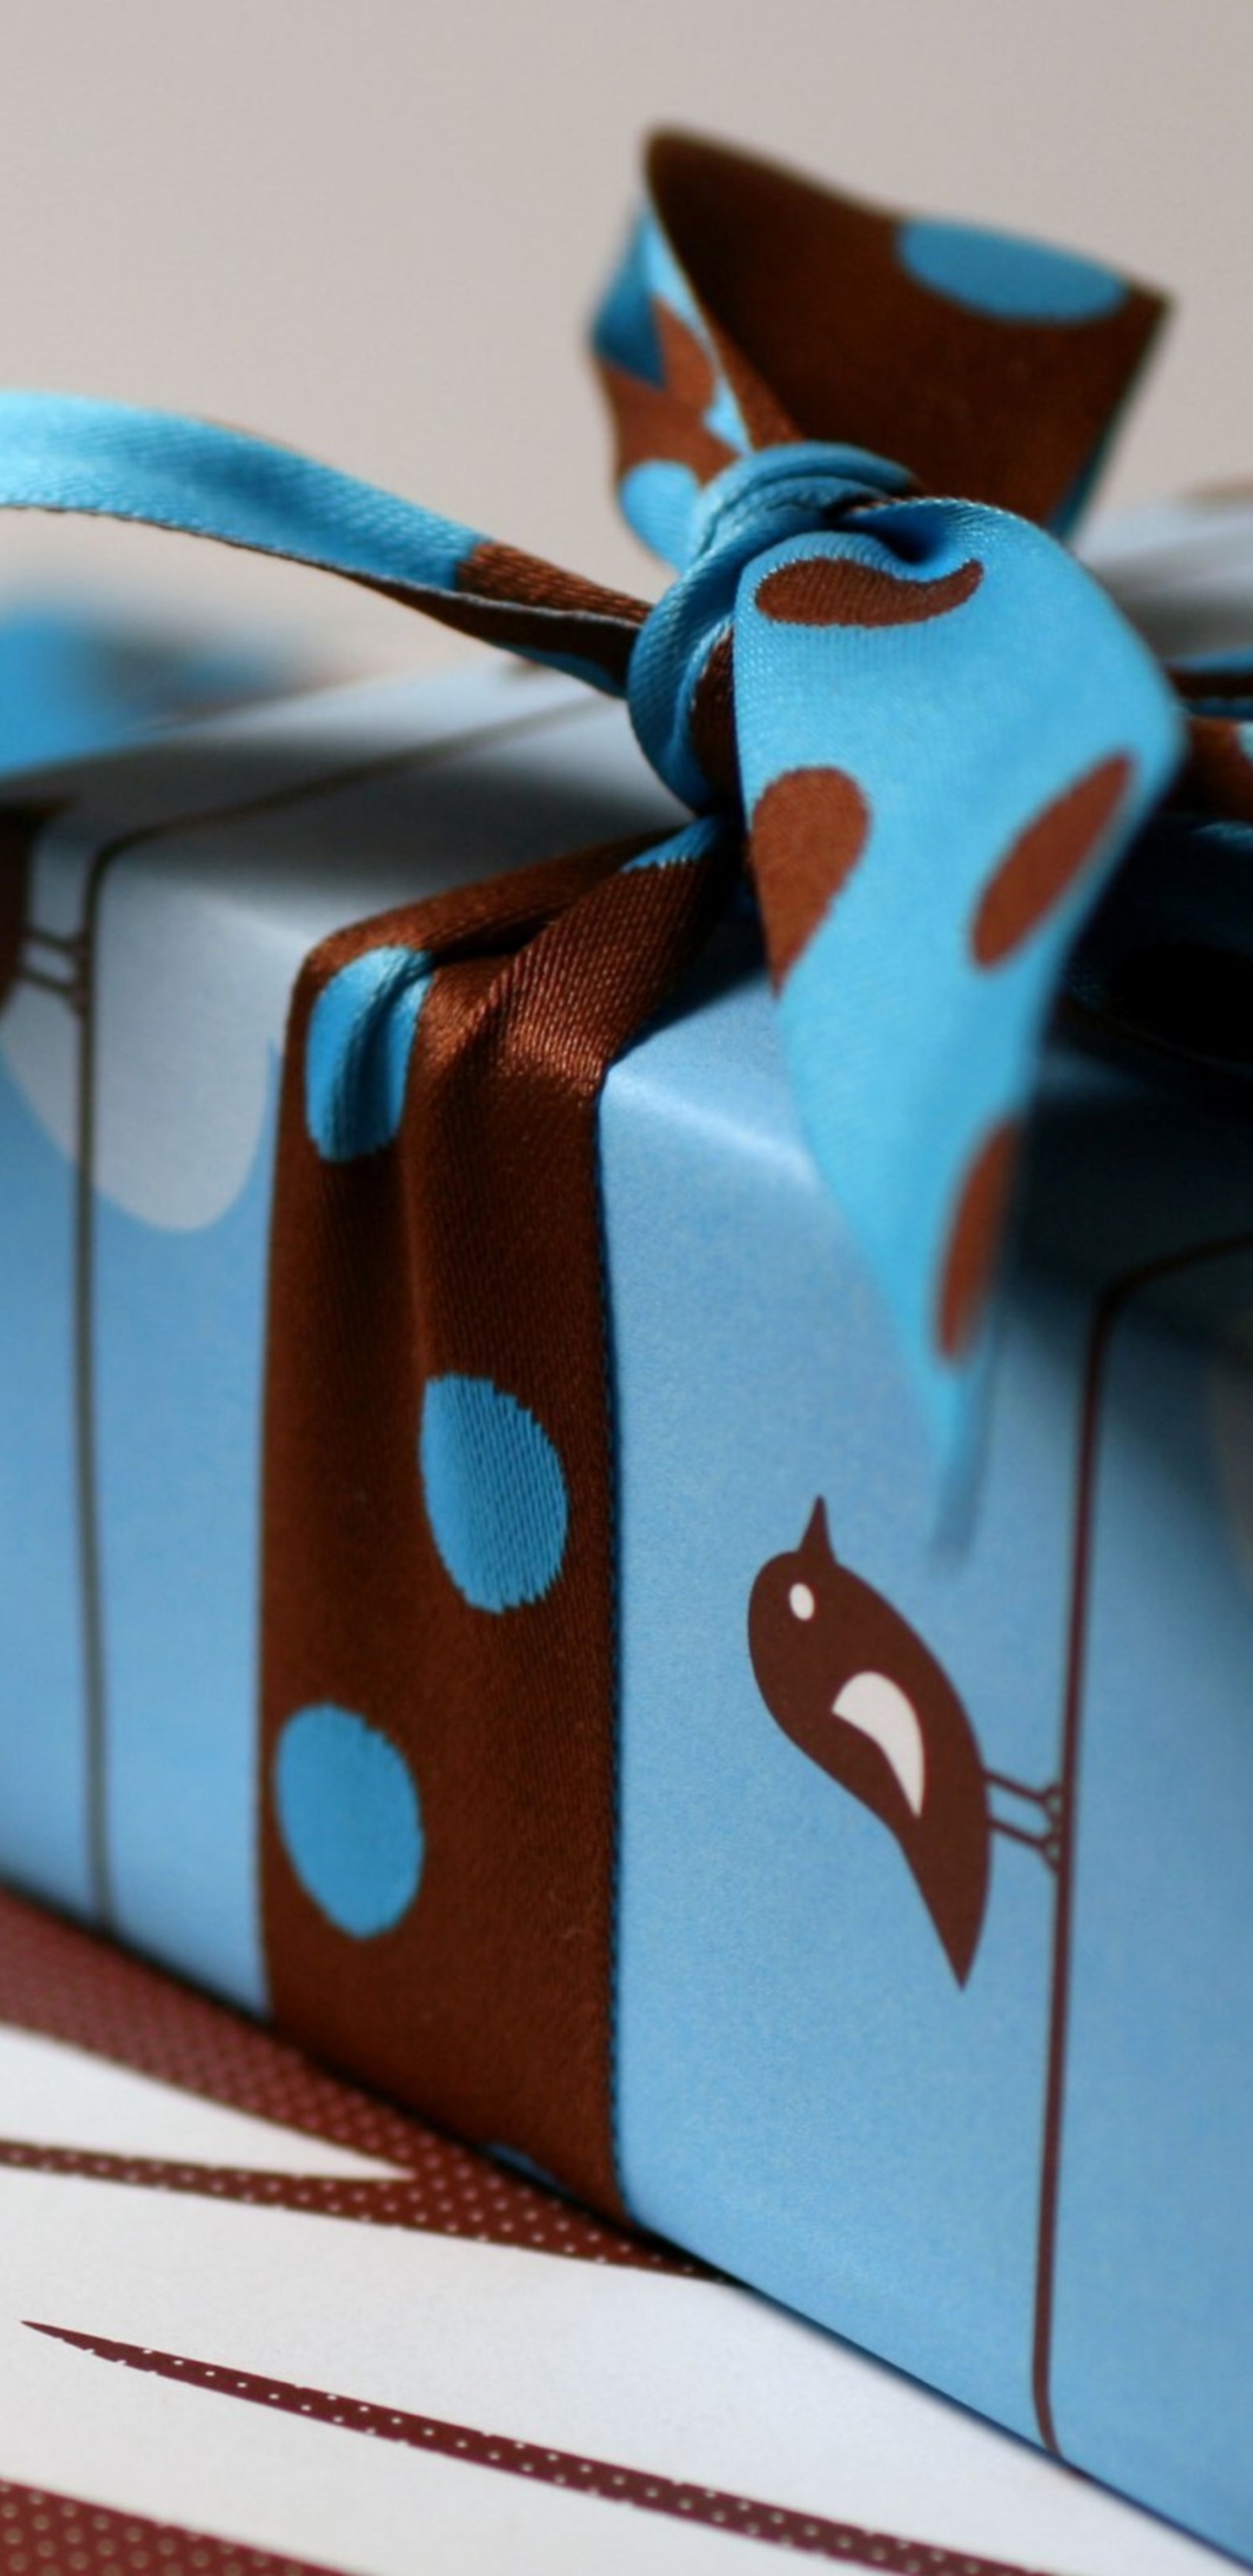 Gift, Box, Ribbon, Blue, Turquoise. Wallpaper in 1440x2960 Resolution